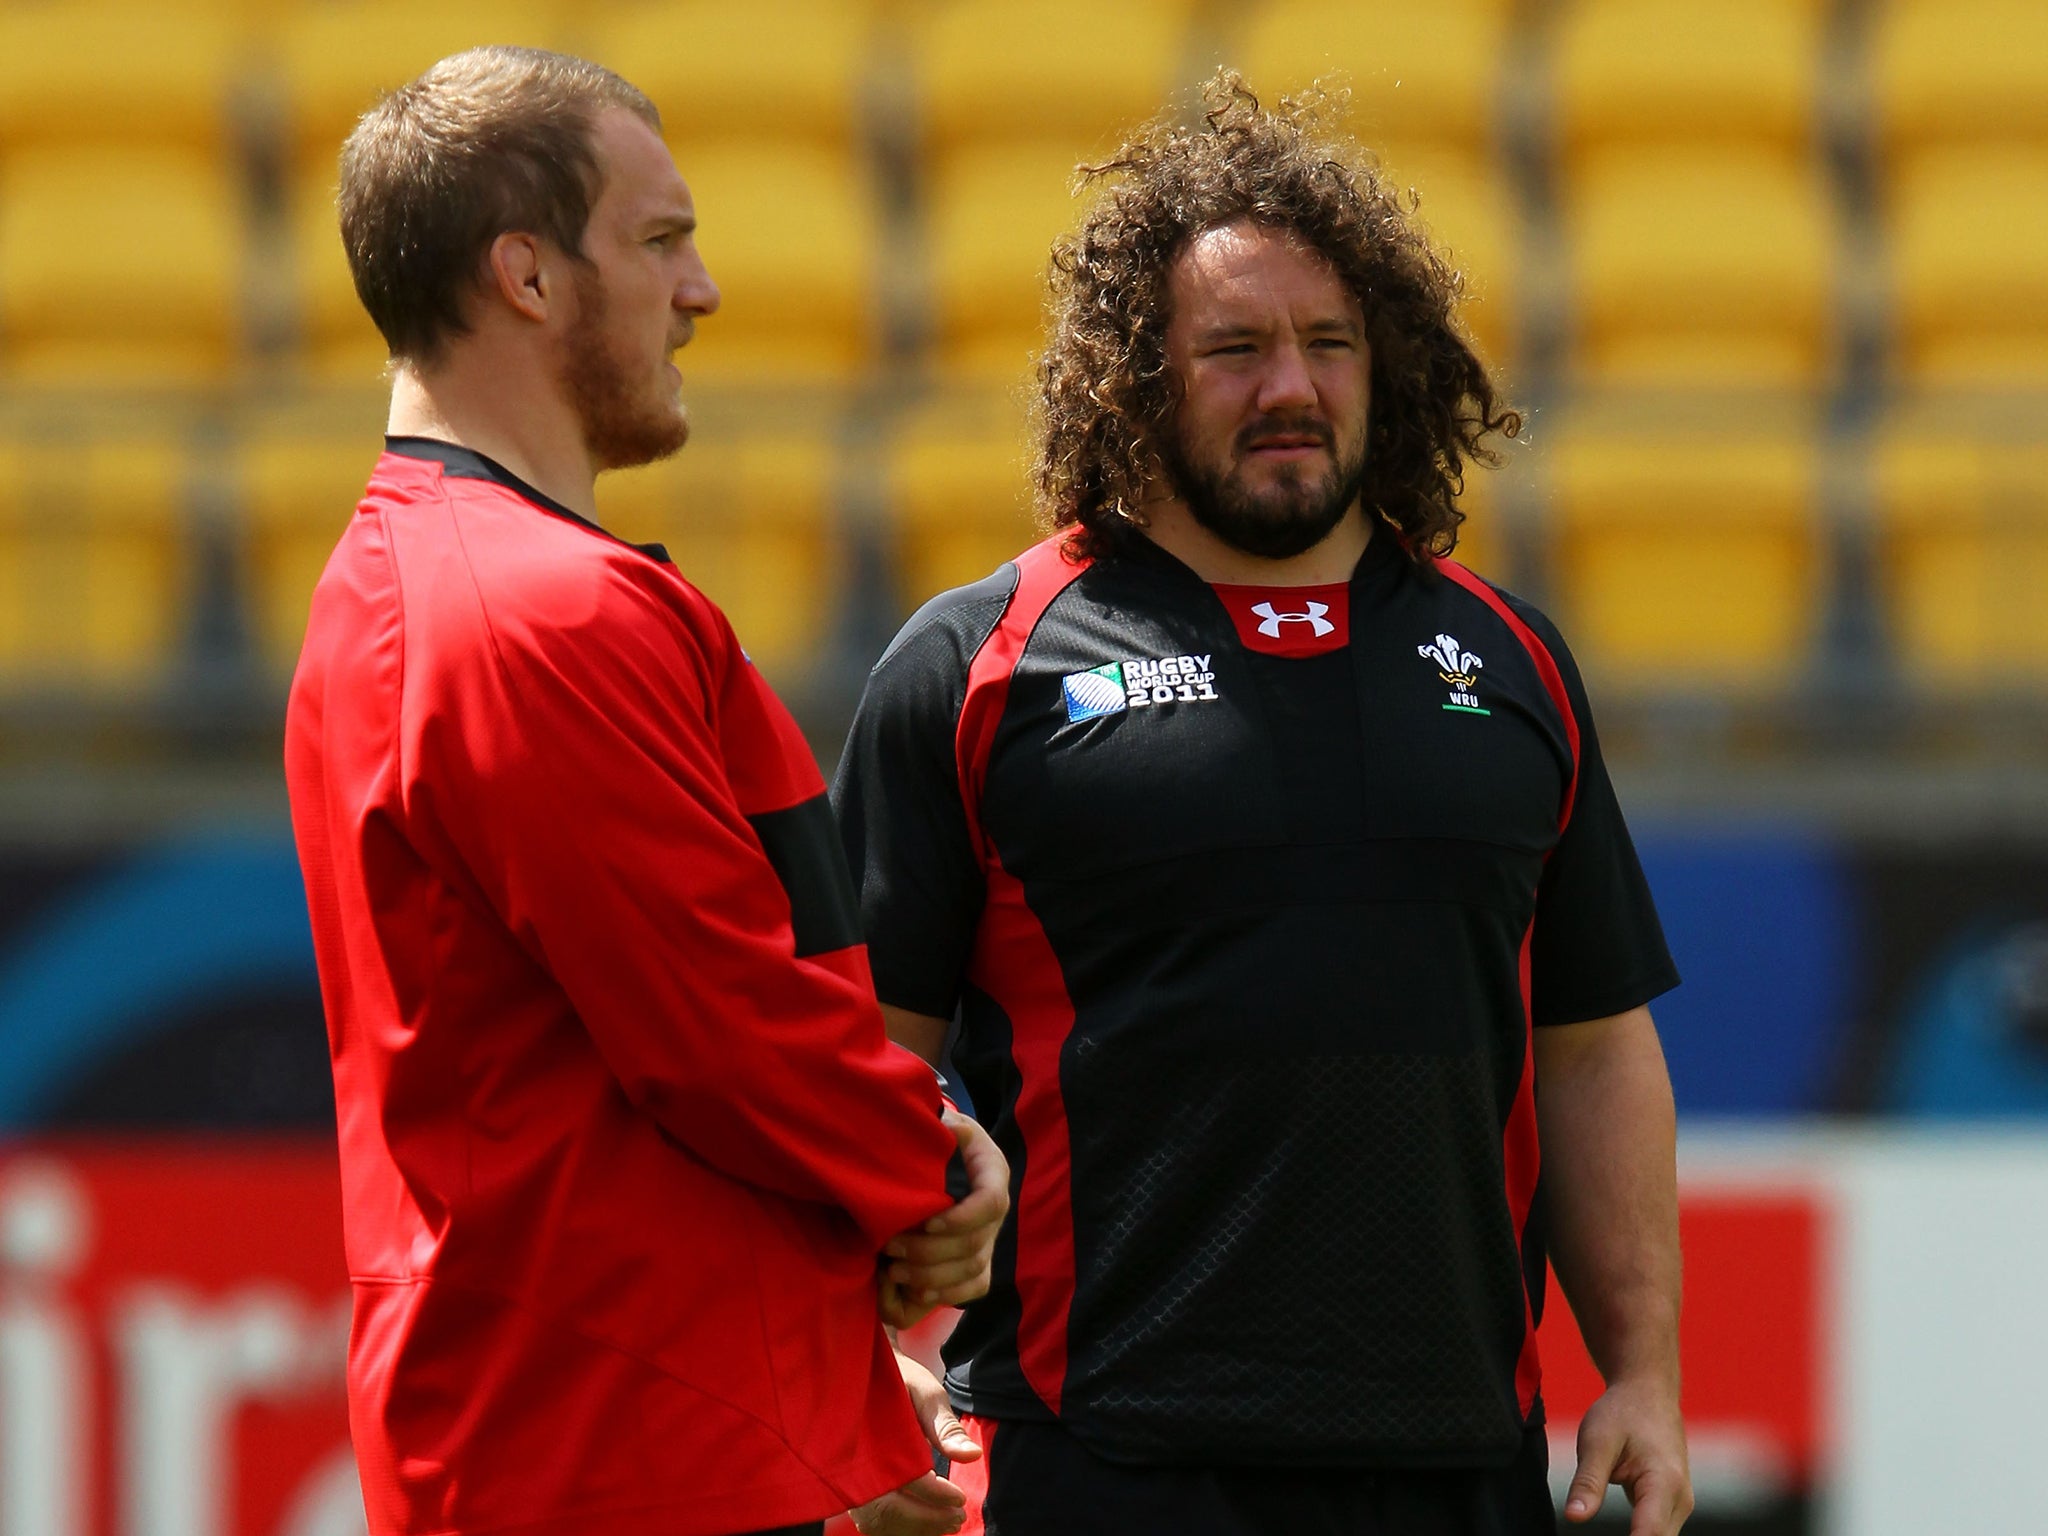 Adam Jones announced his international retirement when
he was not picked for the Six Nations